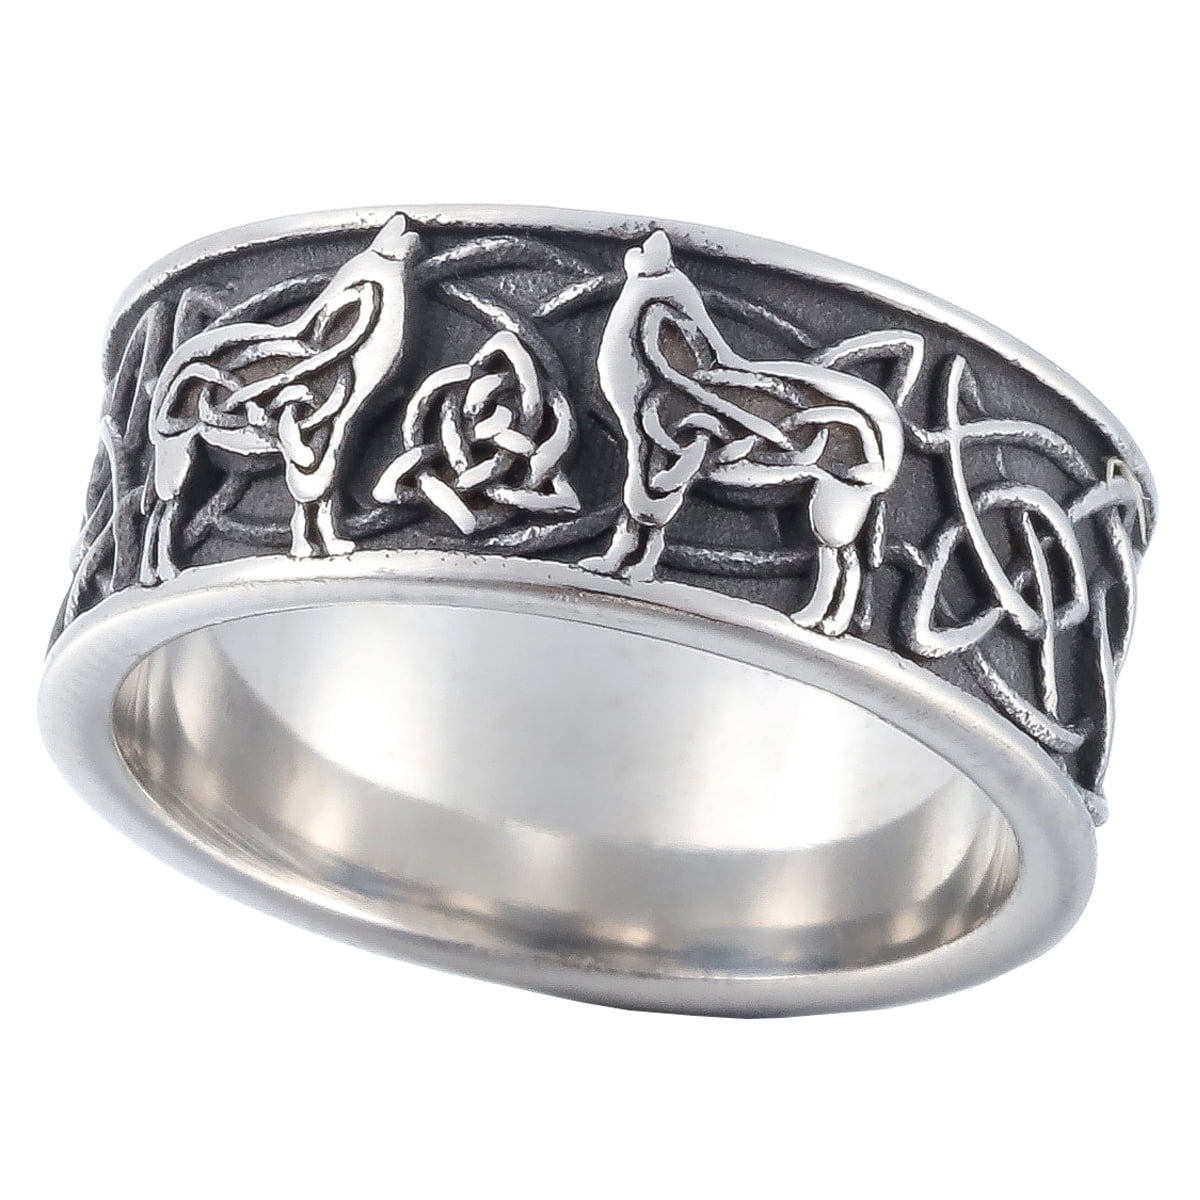 Celtic Wolf Ring with Triquetra - US Sizes 8/9/10/11/12 - Stainless Steel/ Viking | eBay